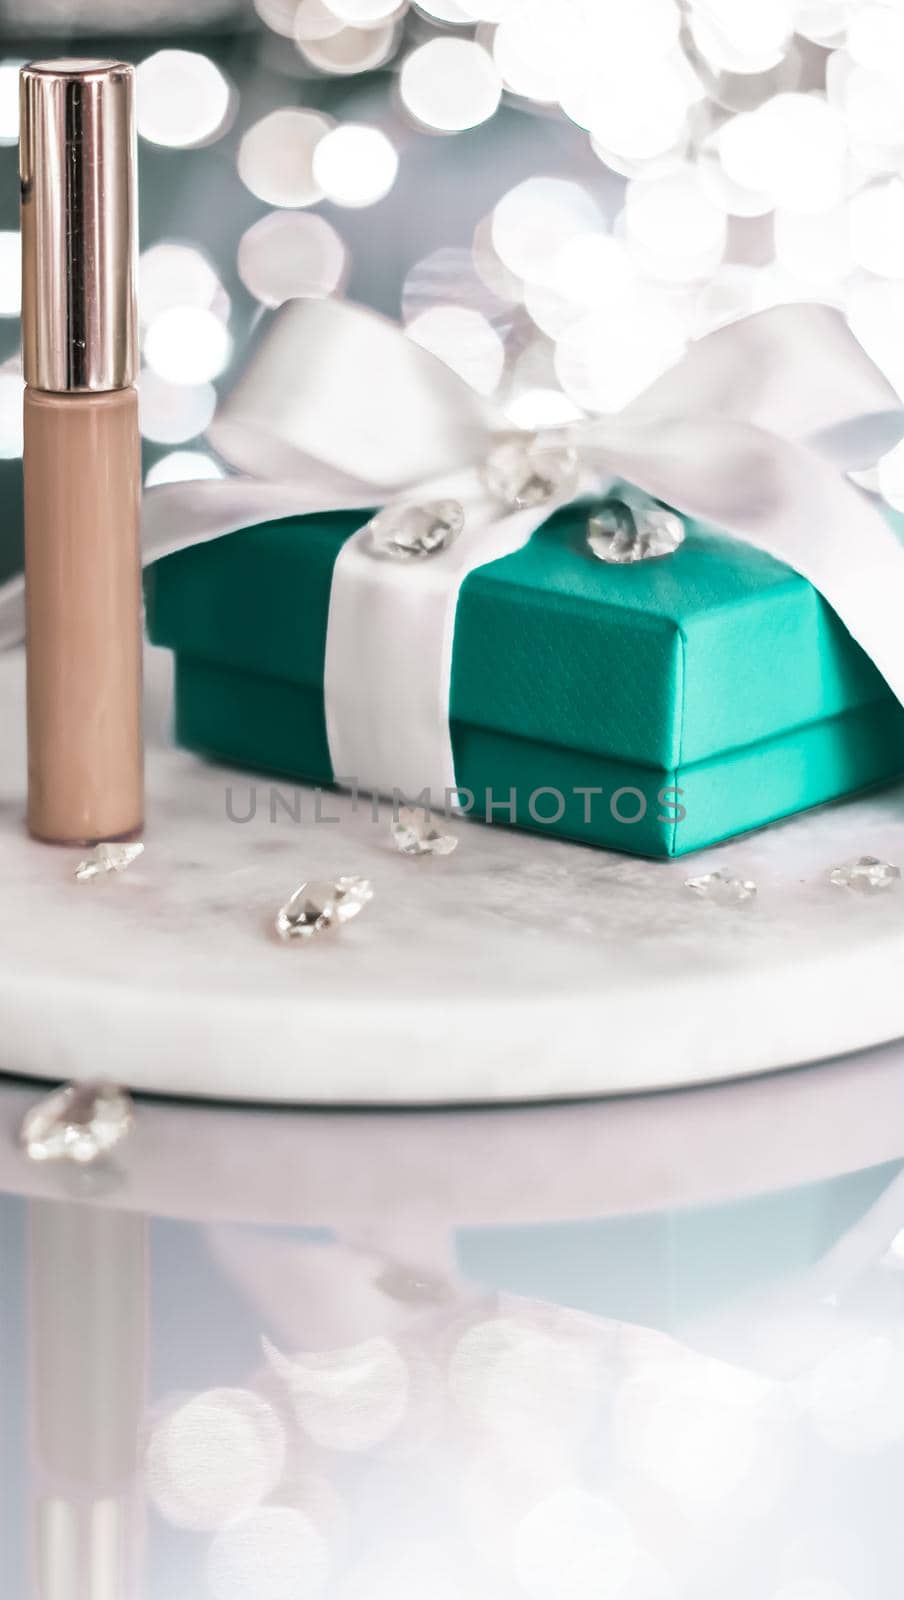 Cosmetic branding, Christmas glitter and girly blog concept - Holiday make-up foundation base, concealer and green gift box, luxury cosmetics present and blank label products for beauty brand design